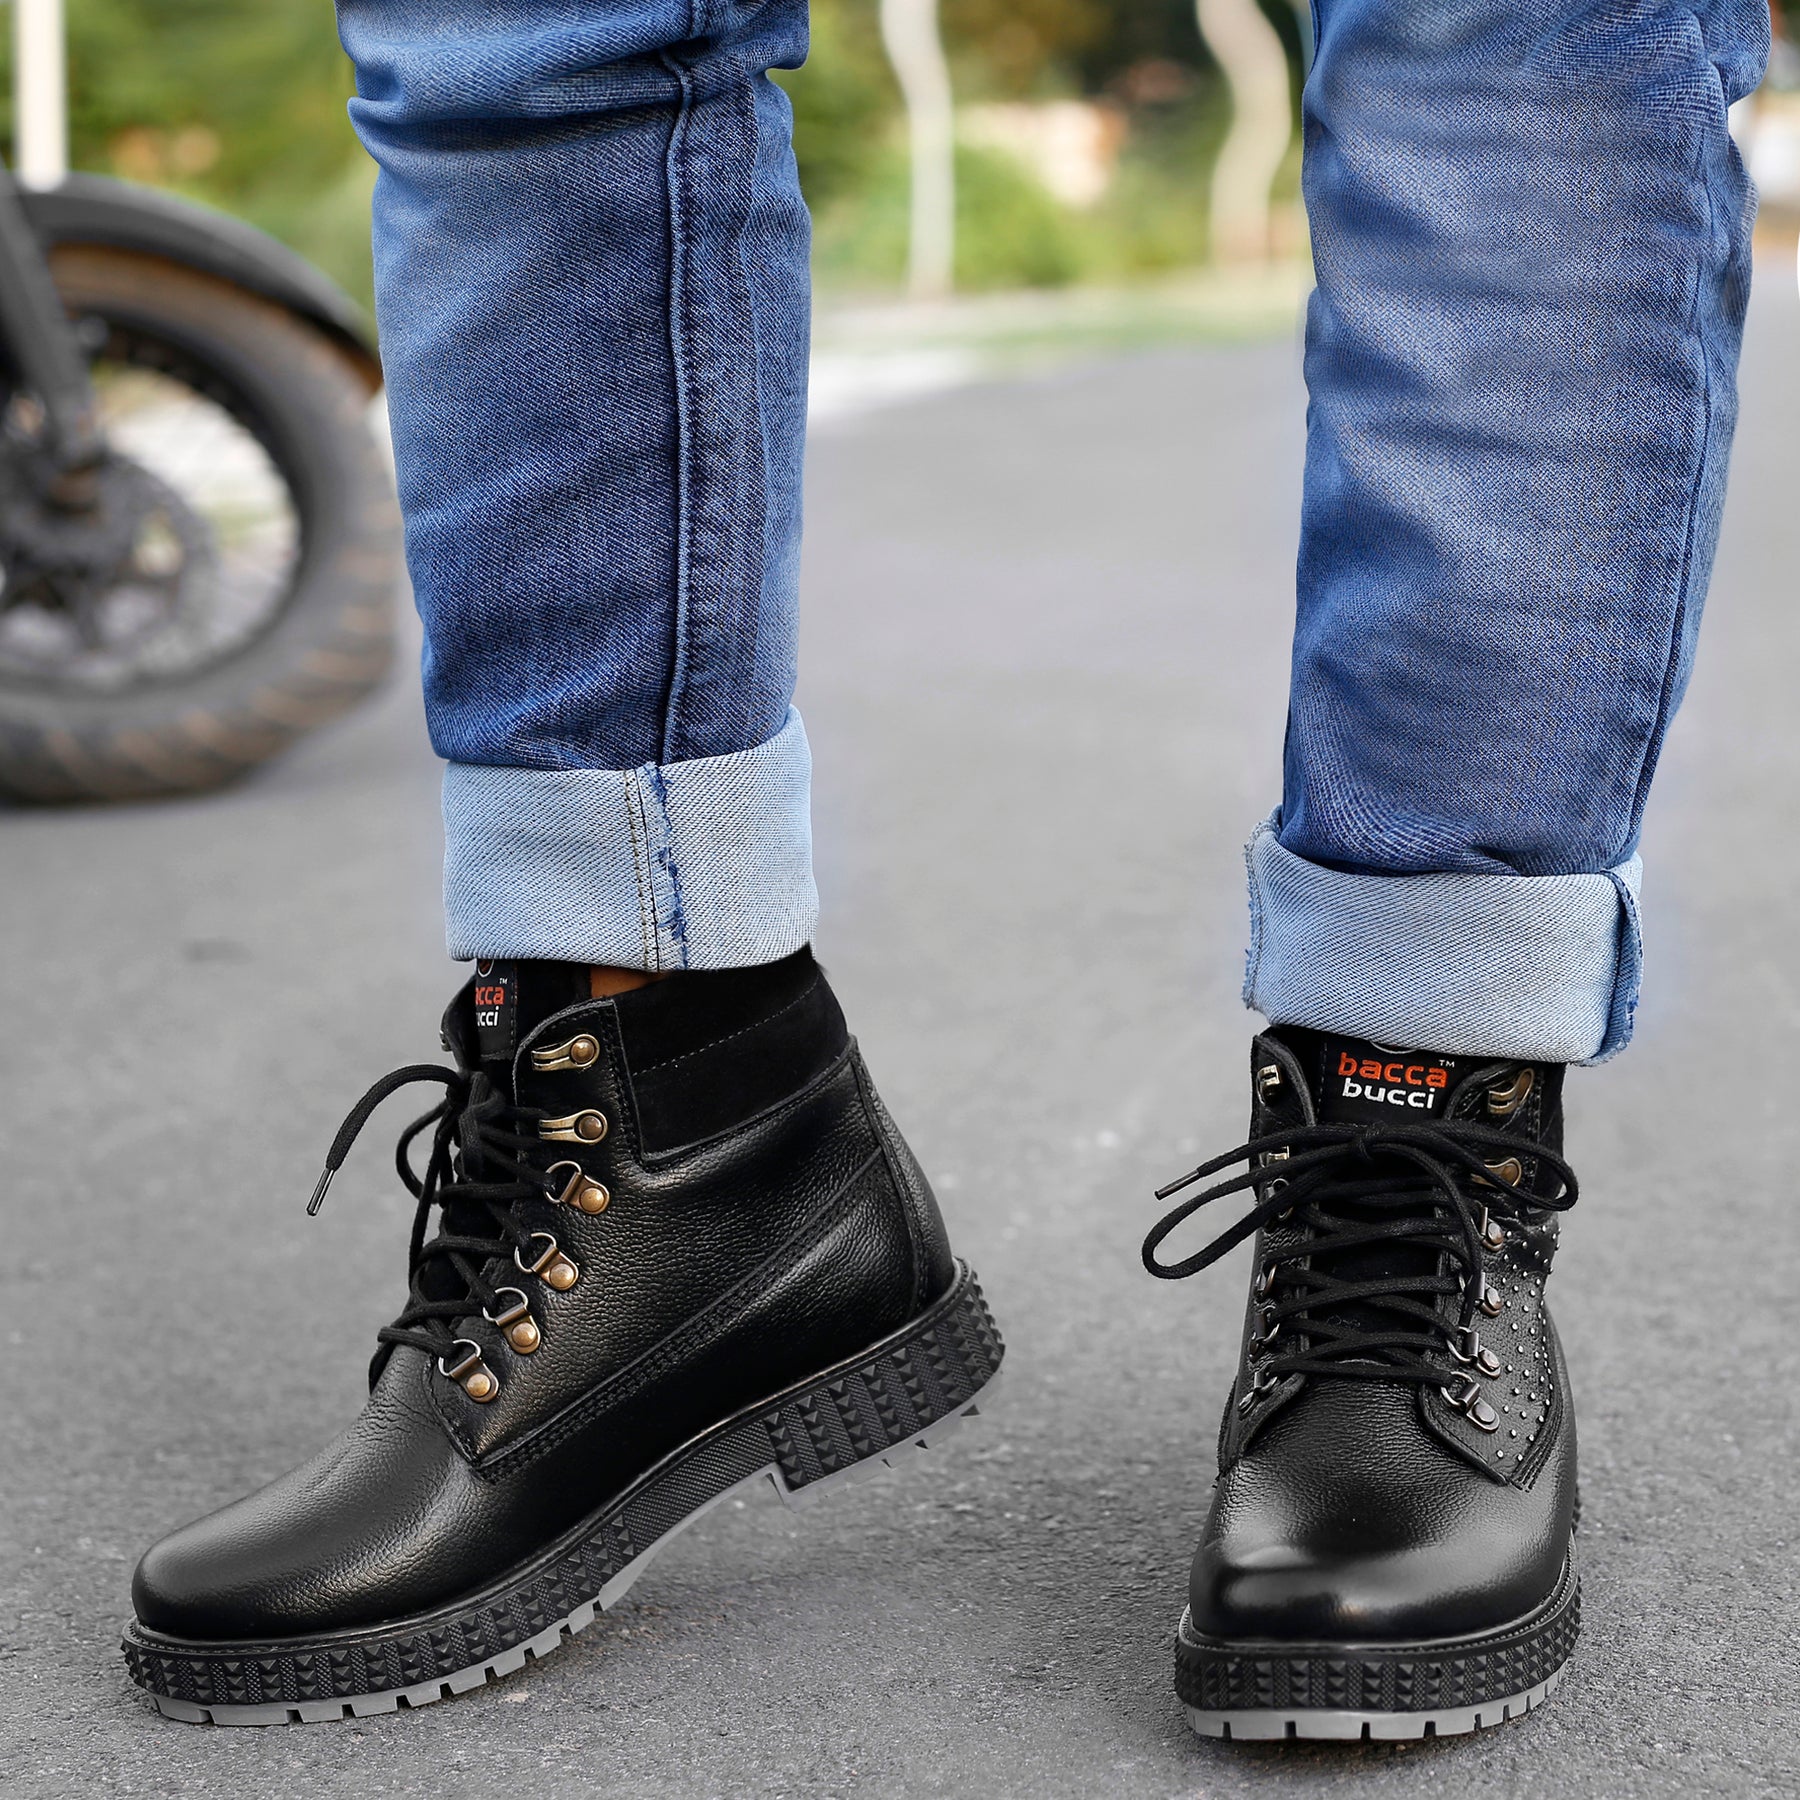 water resistant boots, leather boots for men, leather boots, black leather boots